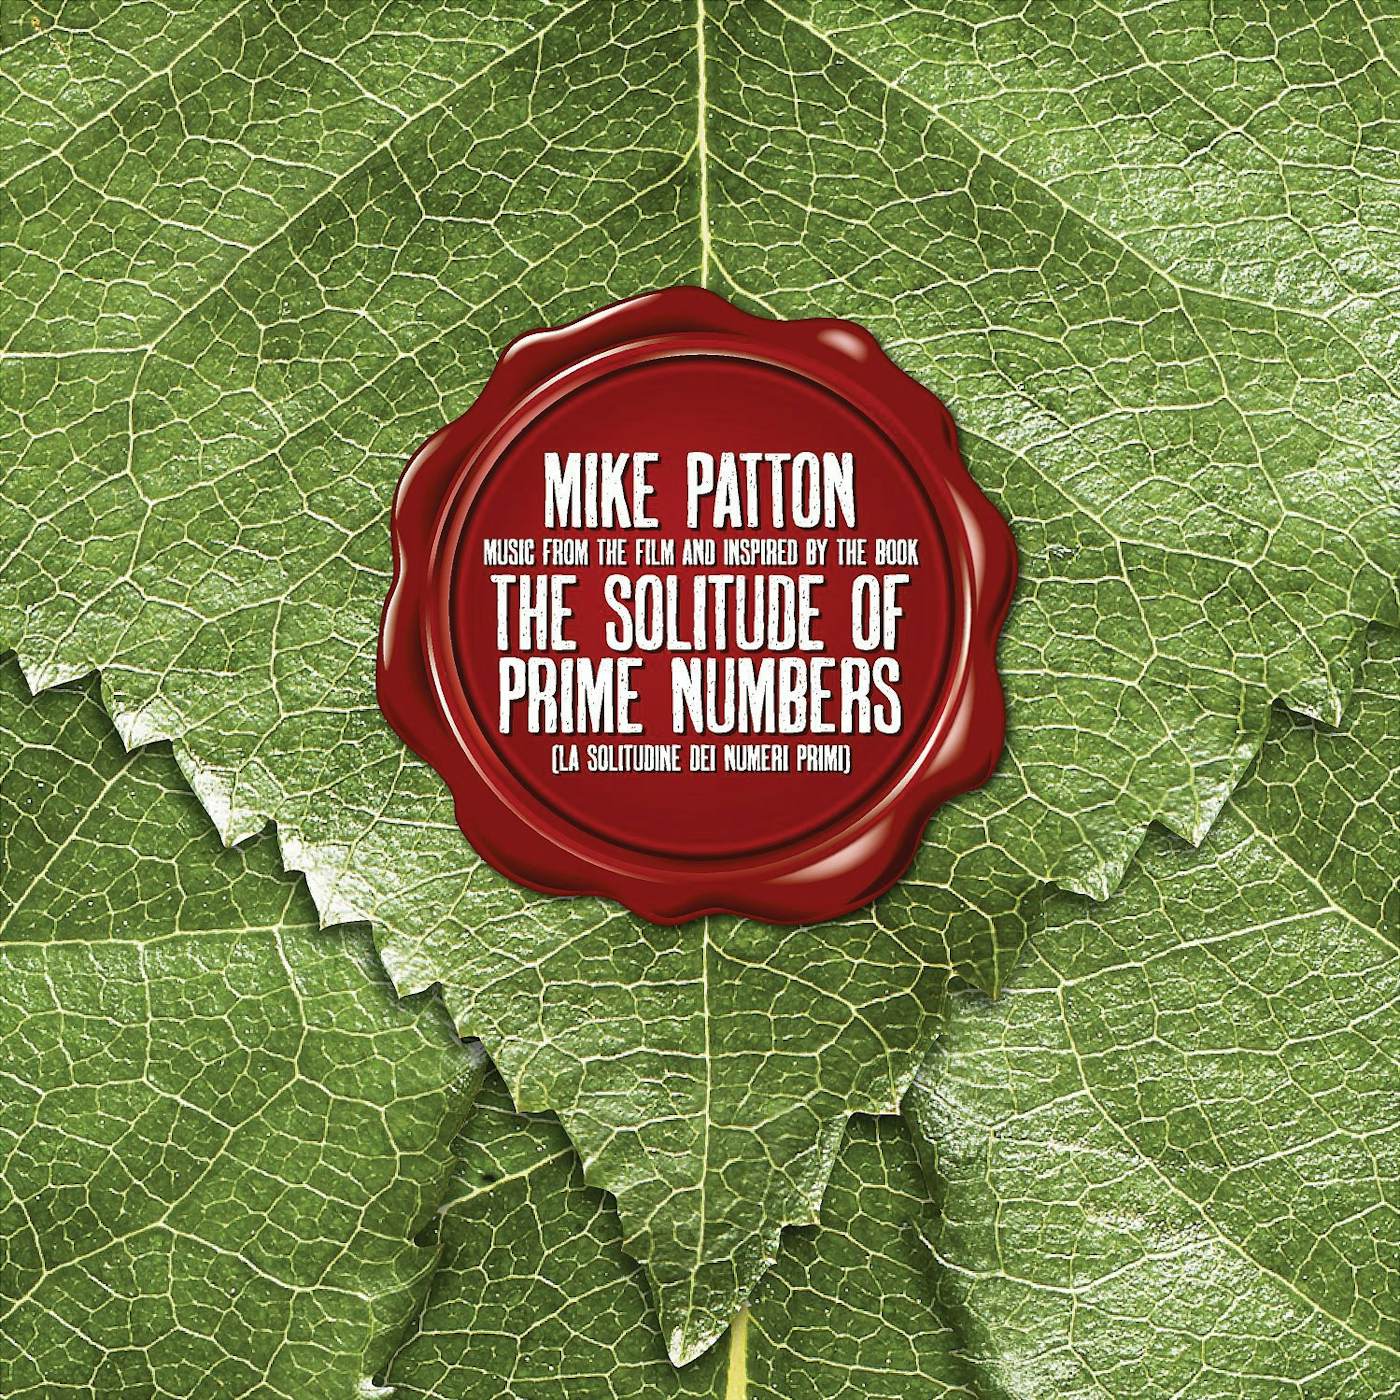 Mike Patton SOLITUDE OF PRIME NUMBERS CD